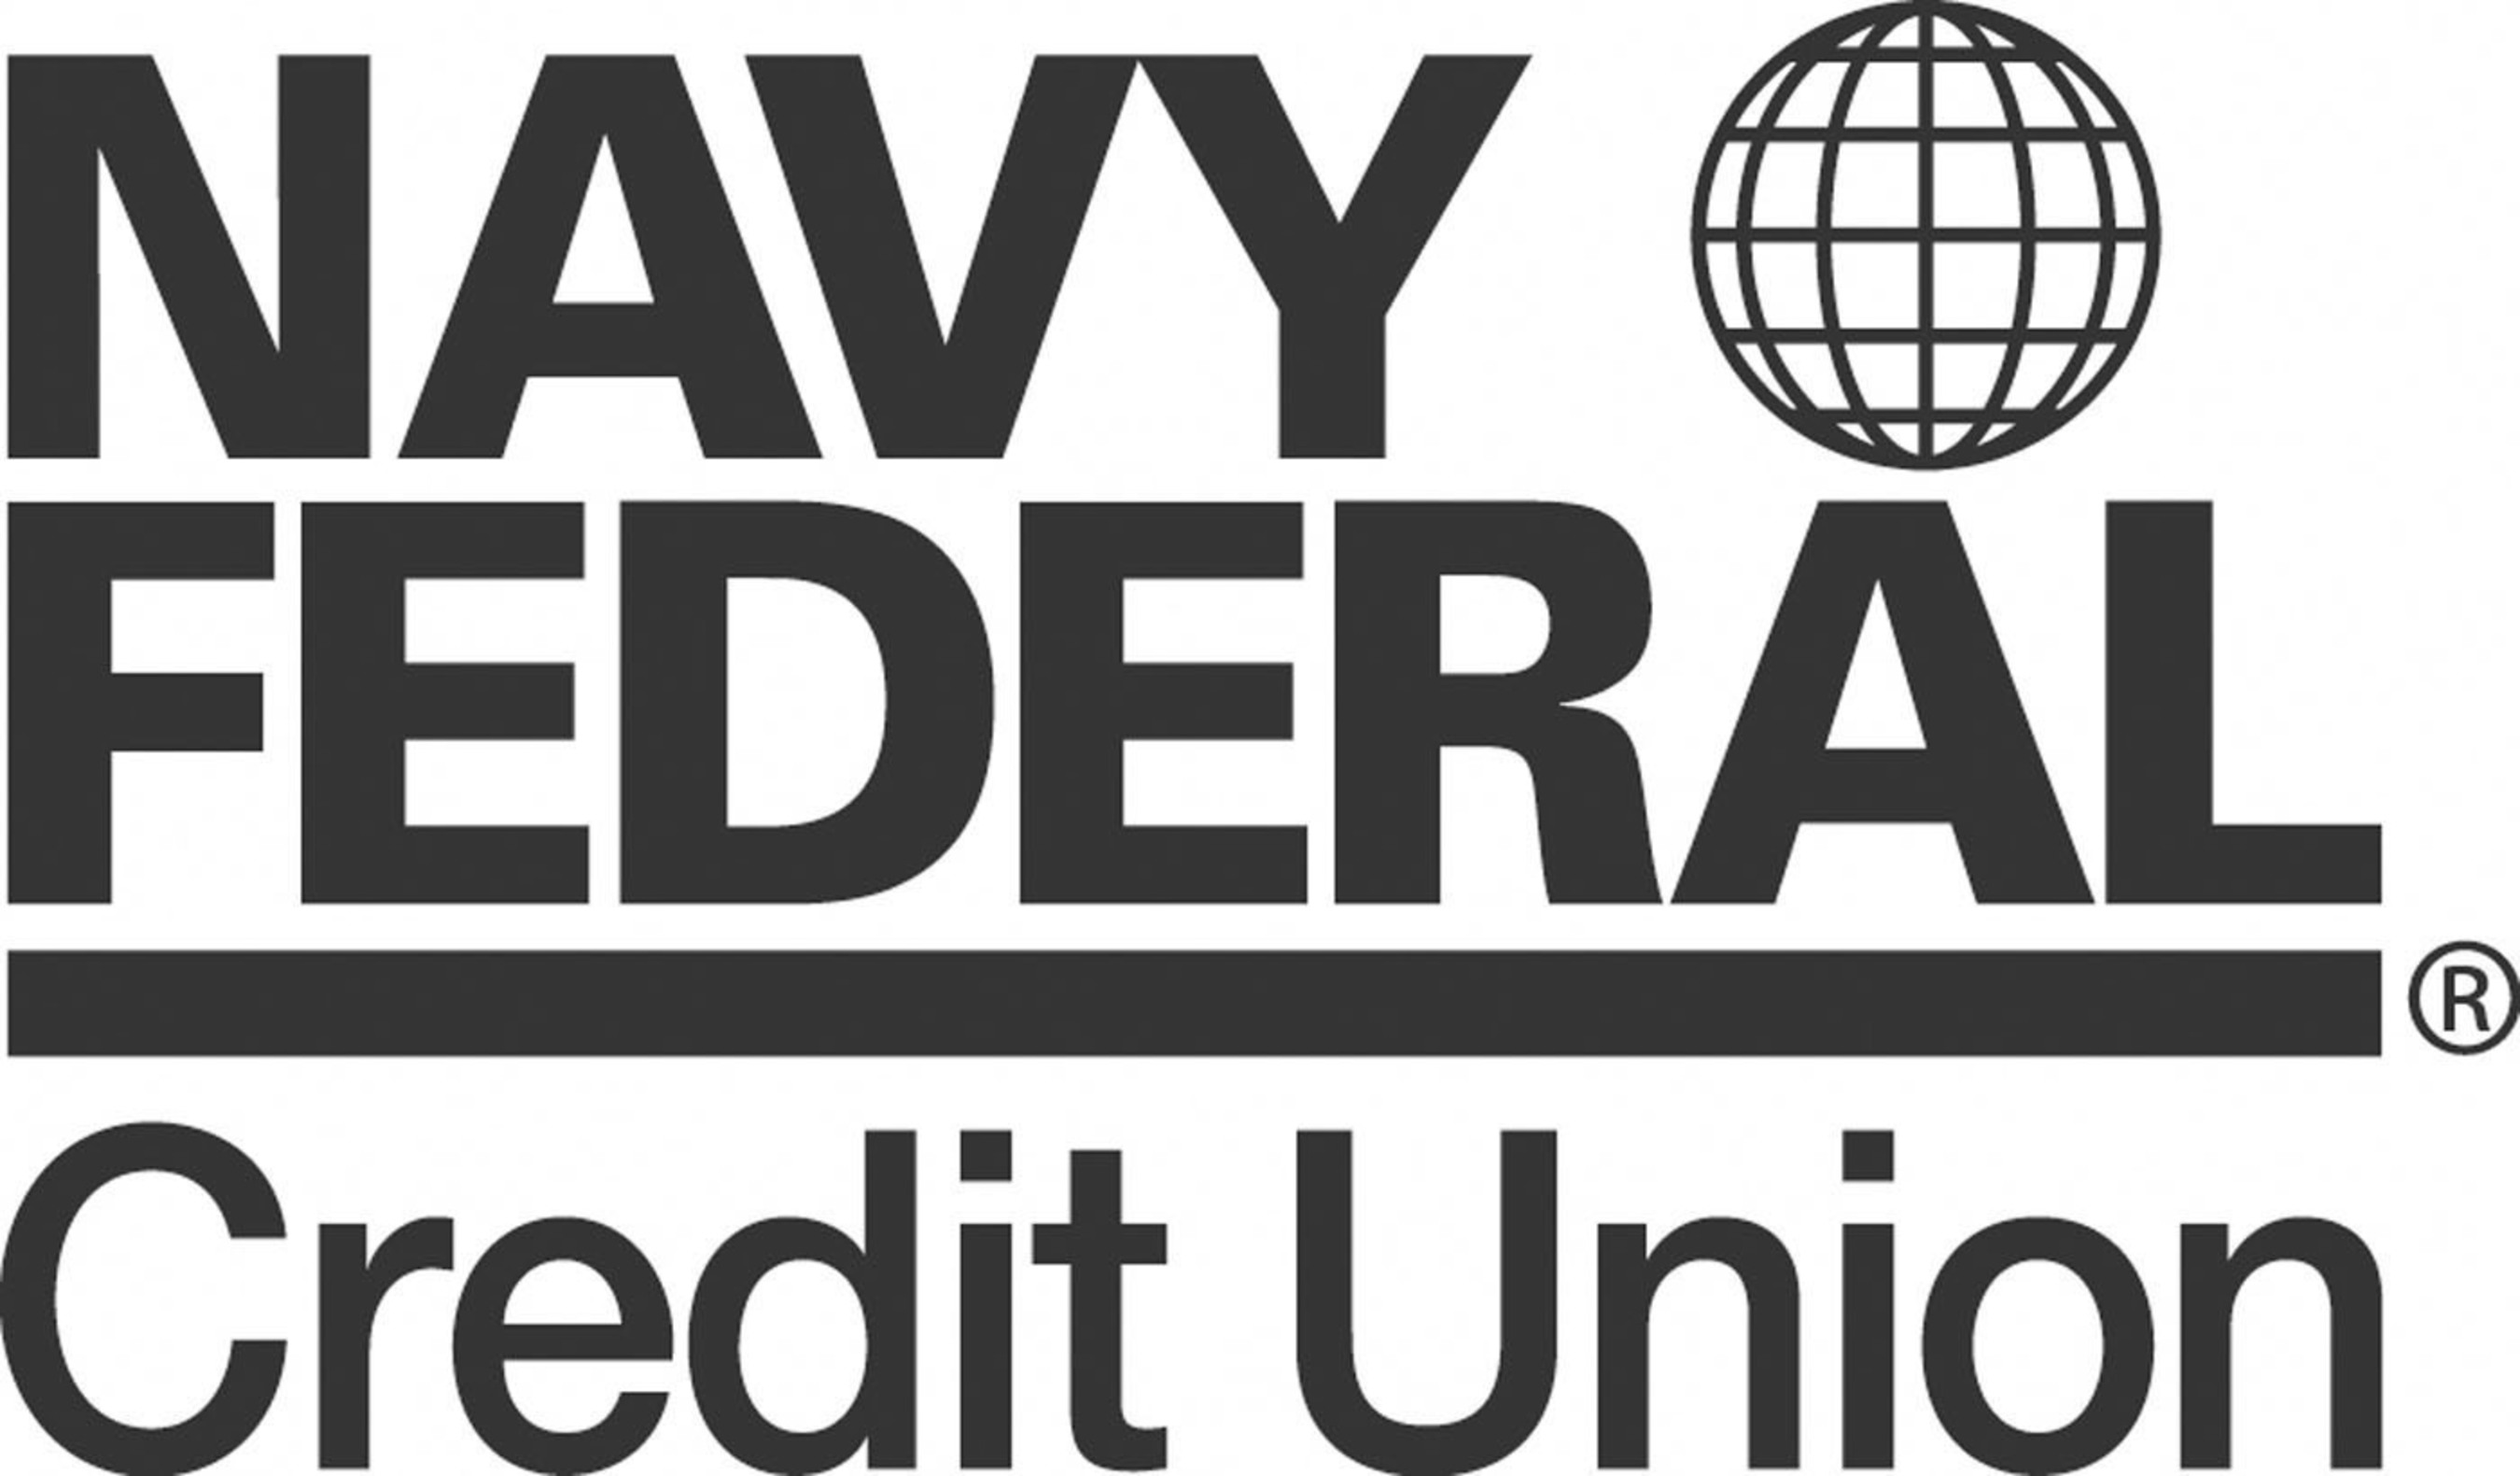 Navy Federal Adds Samsung Pay To Its Mobile Payment Options.